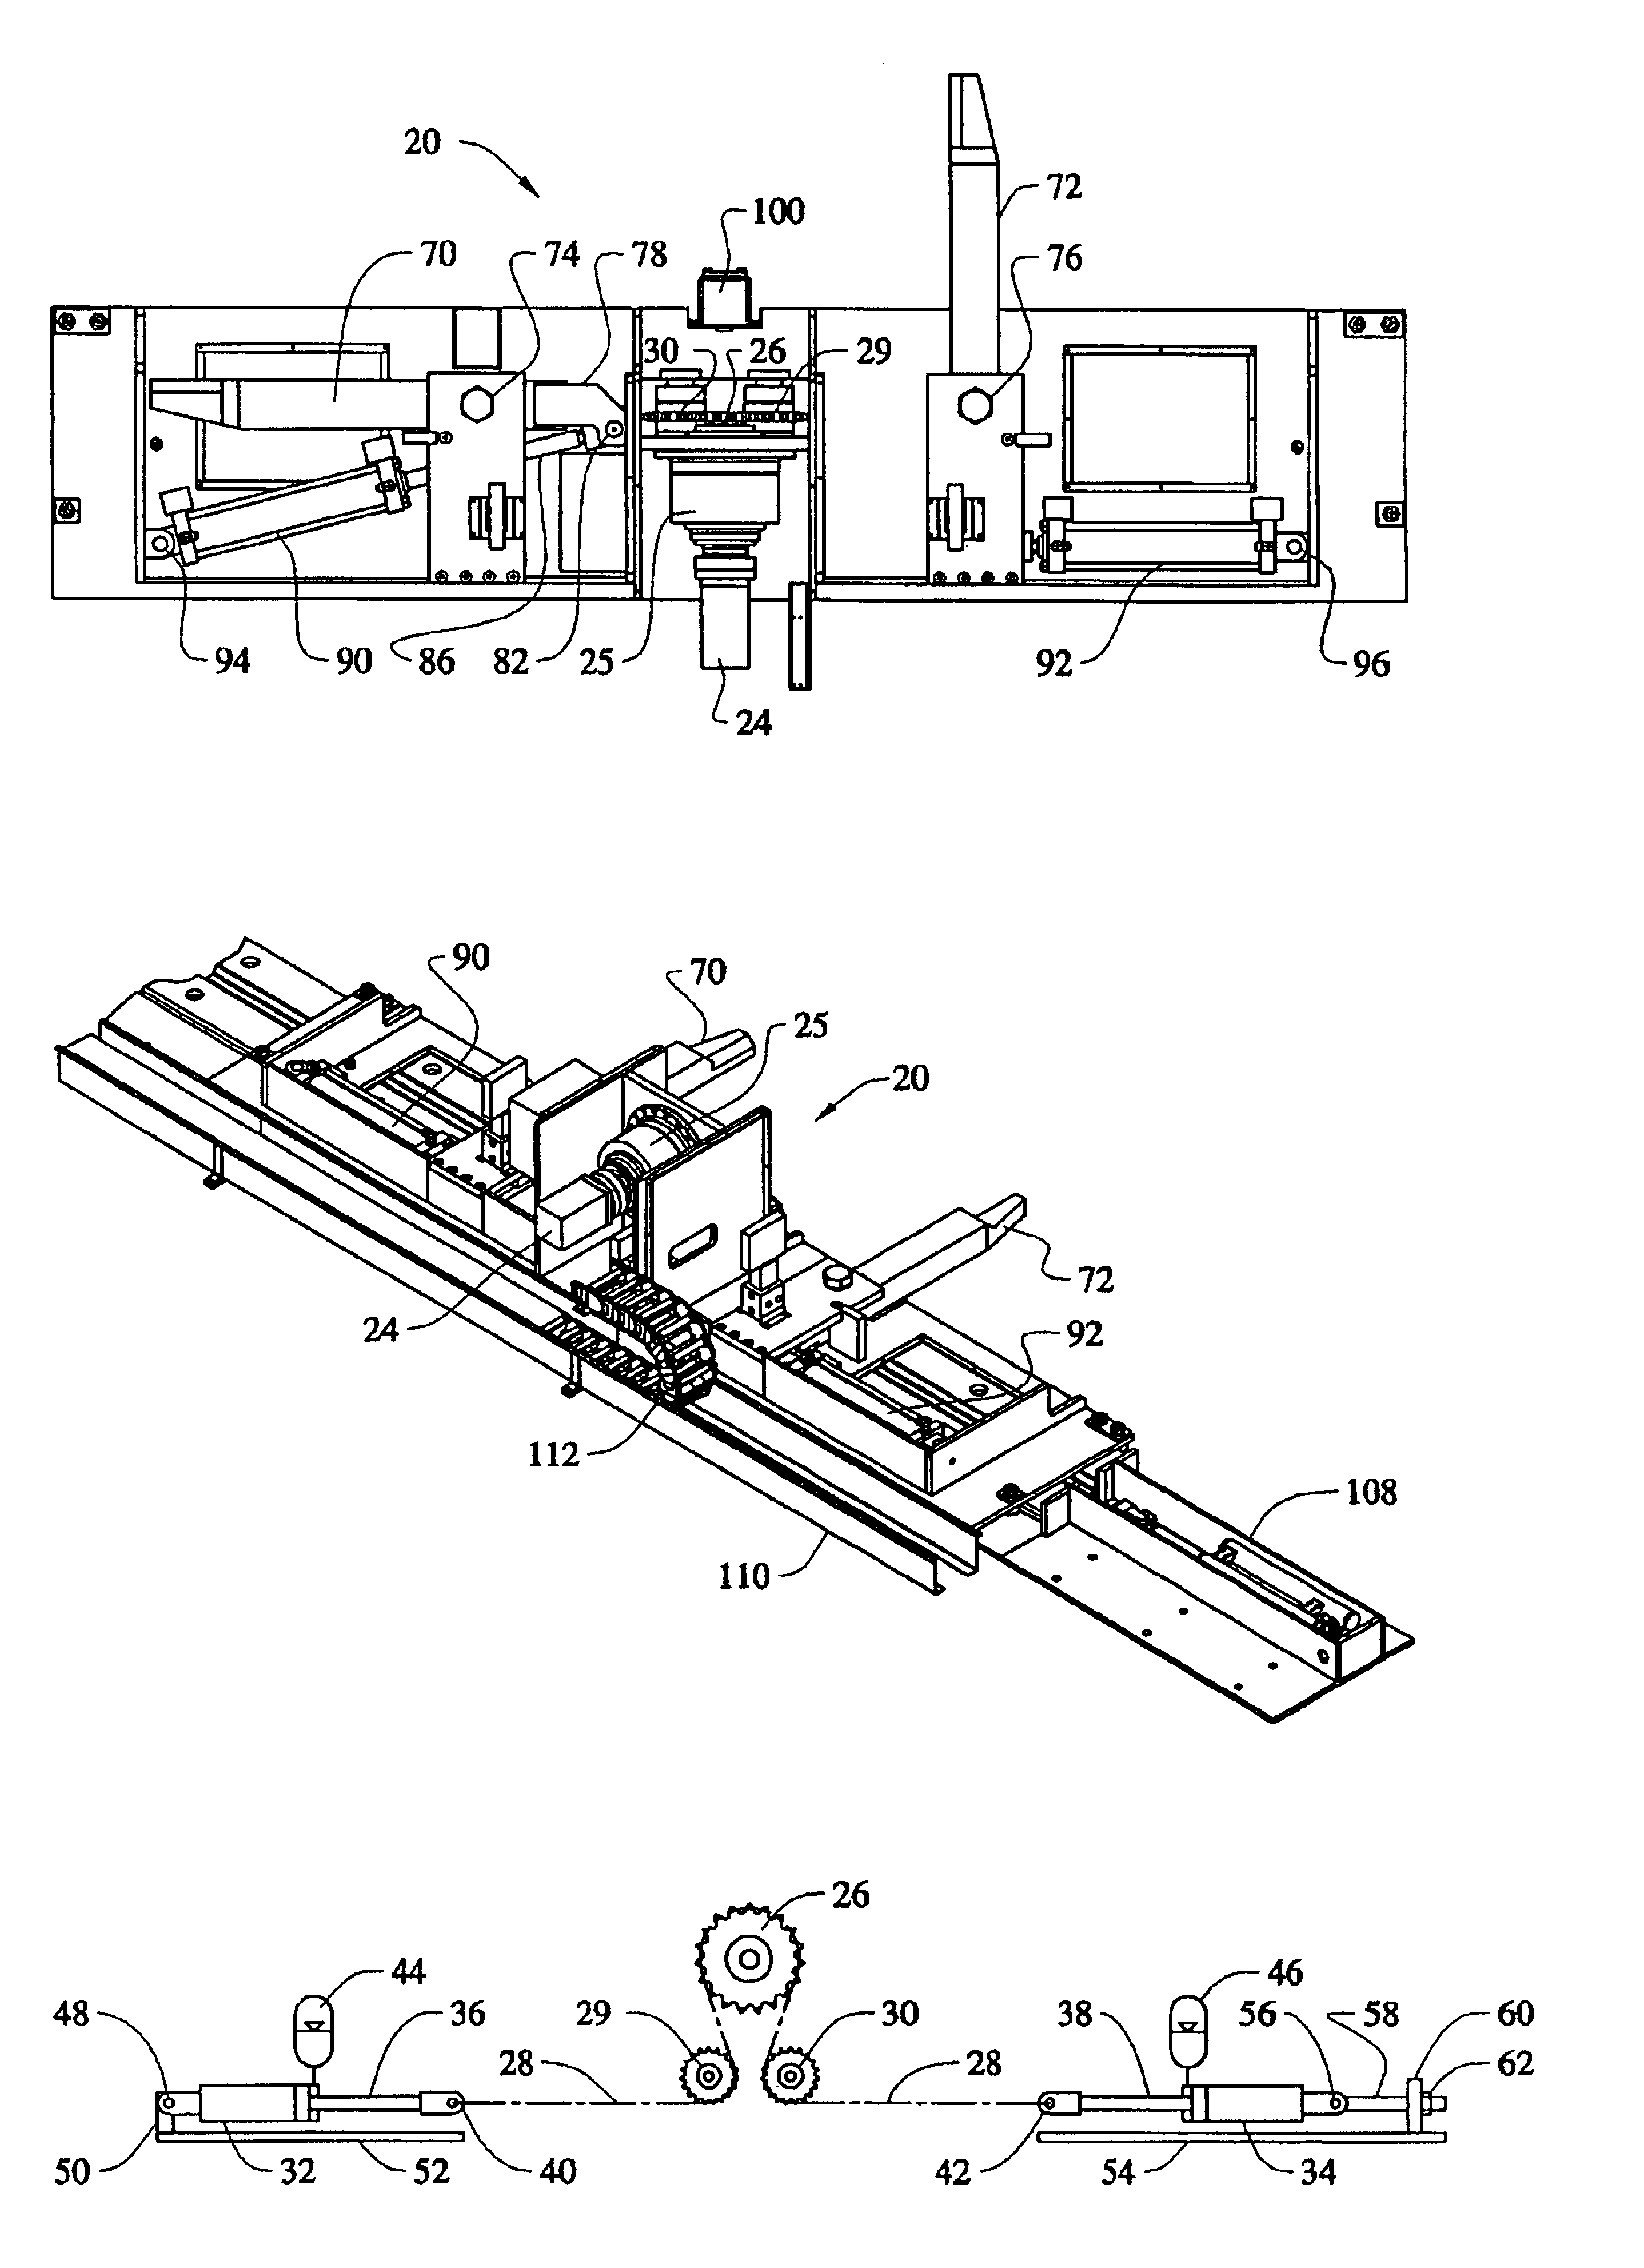 Indexer with self-powered carriage